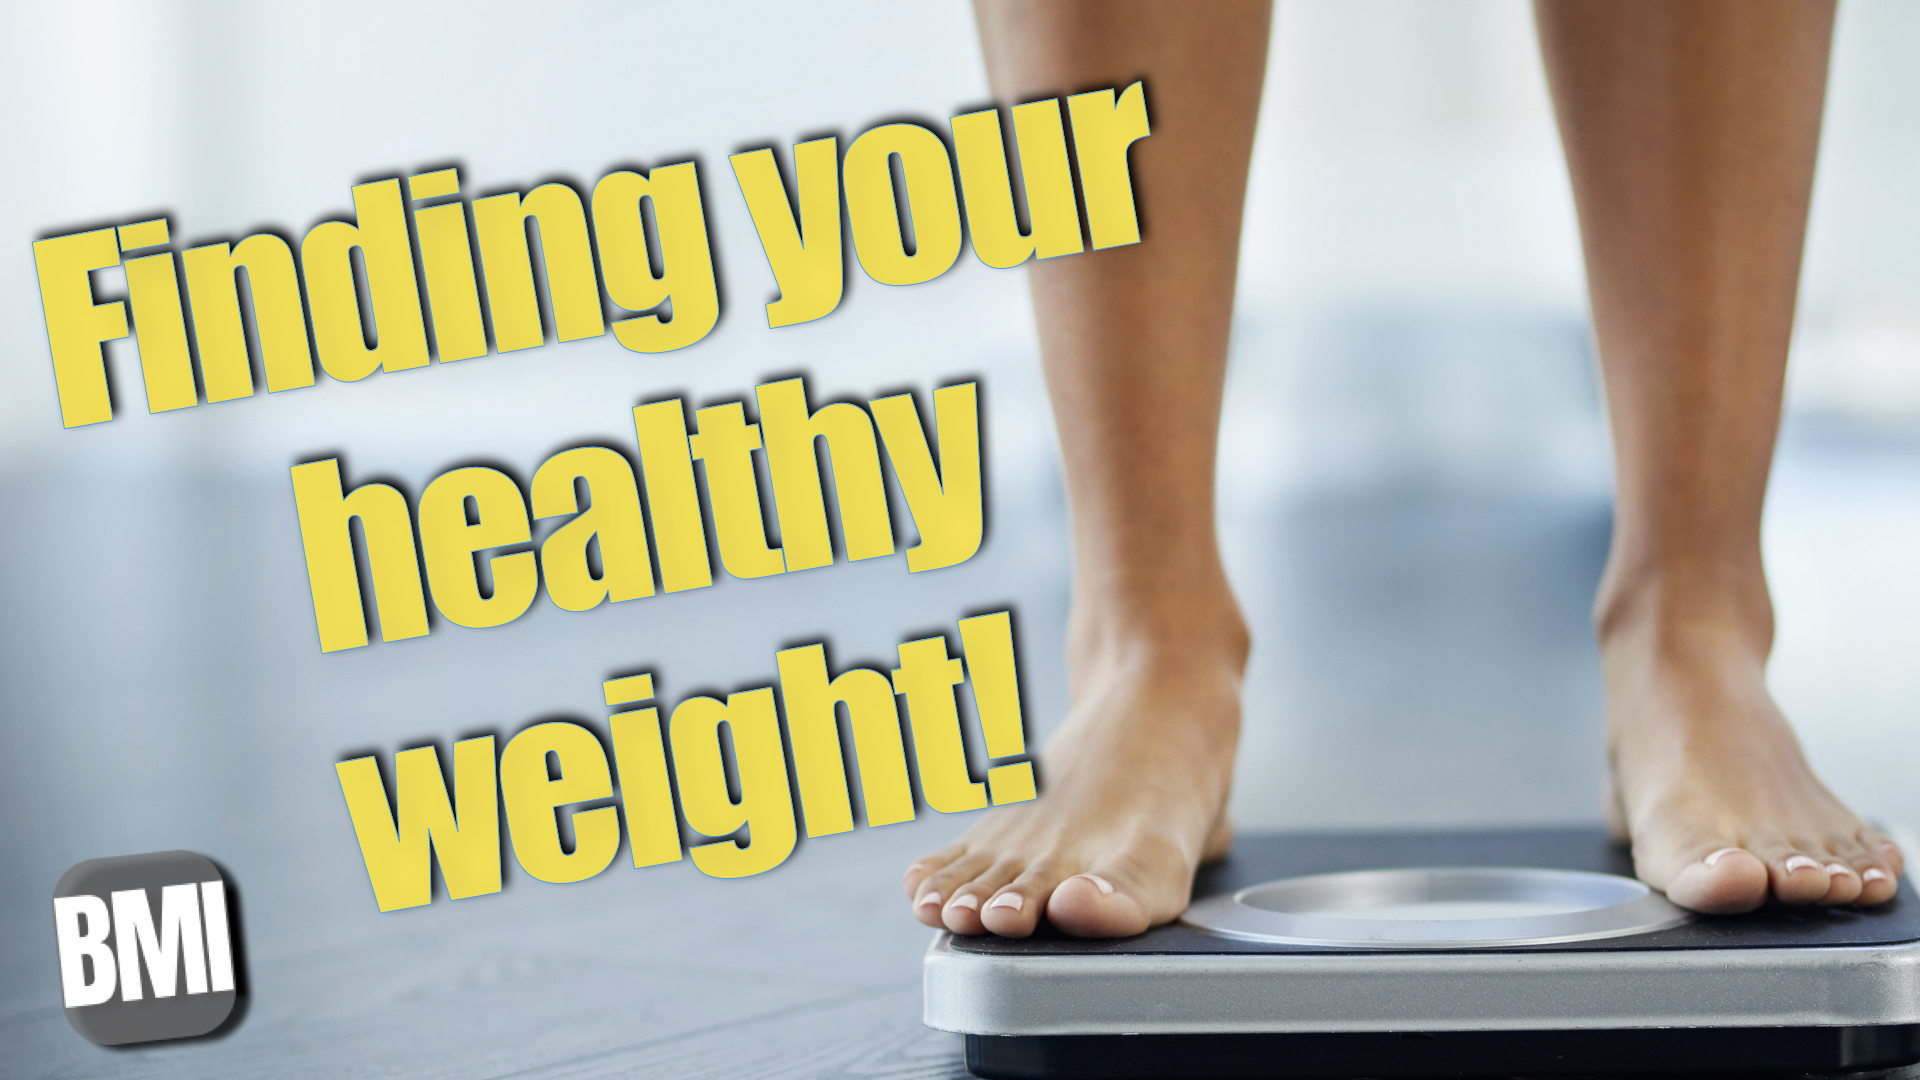 BMI: Finding your healthy weight